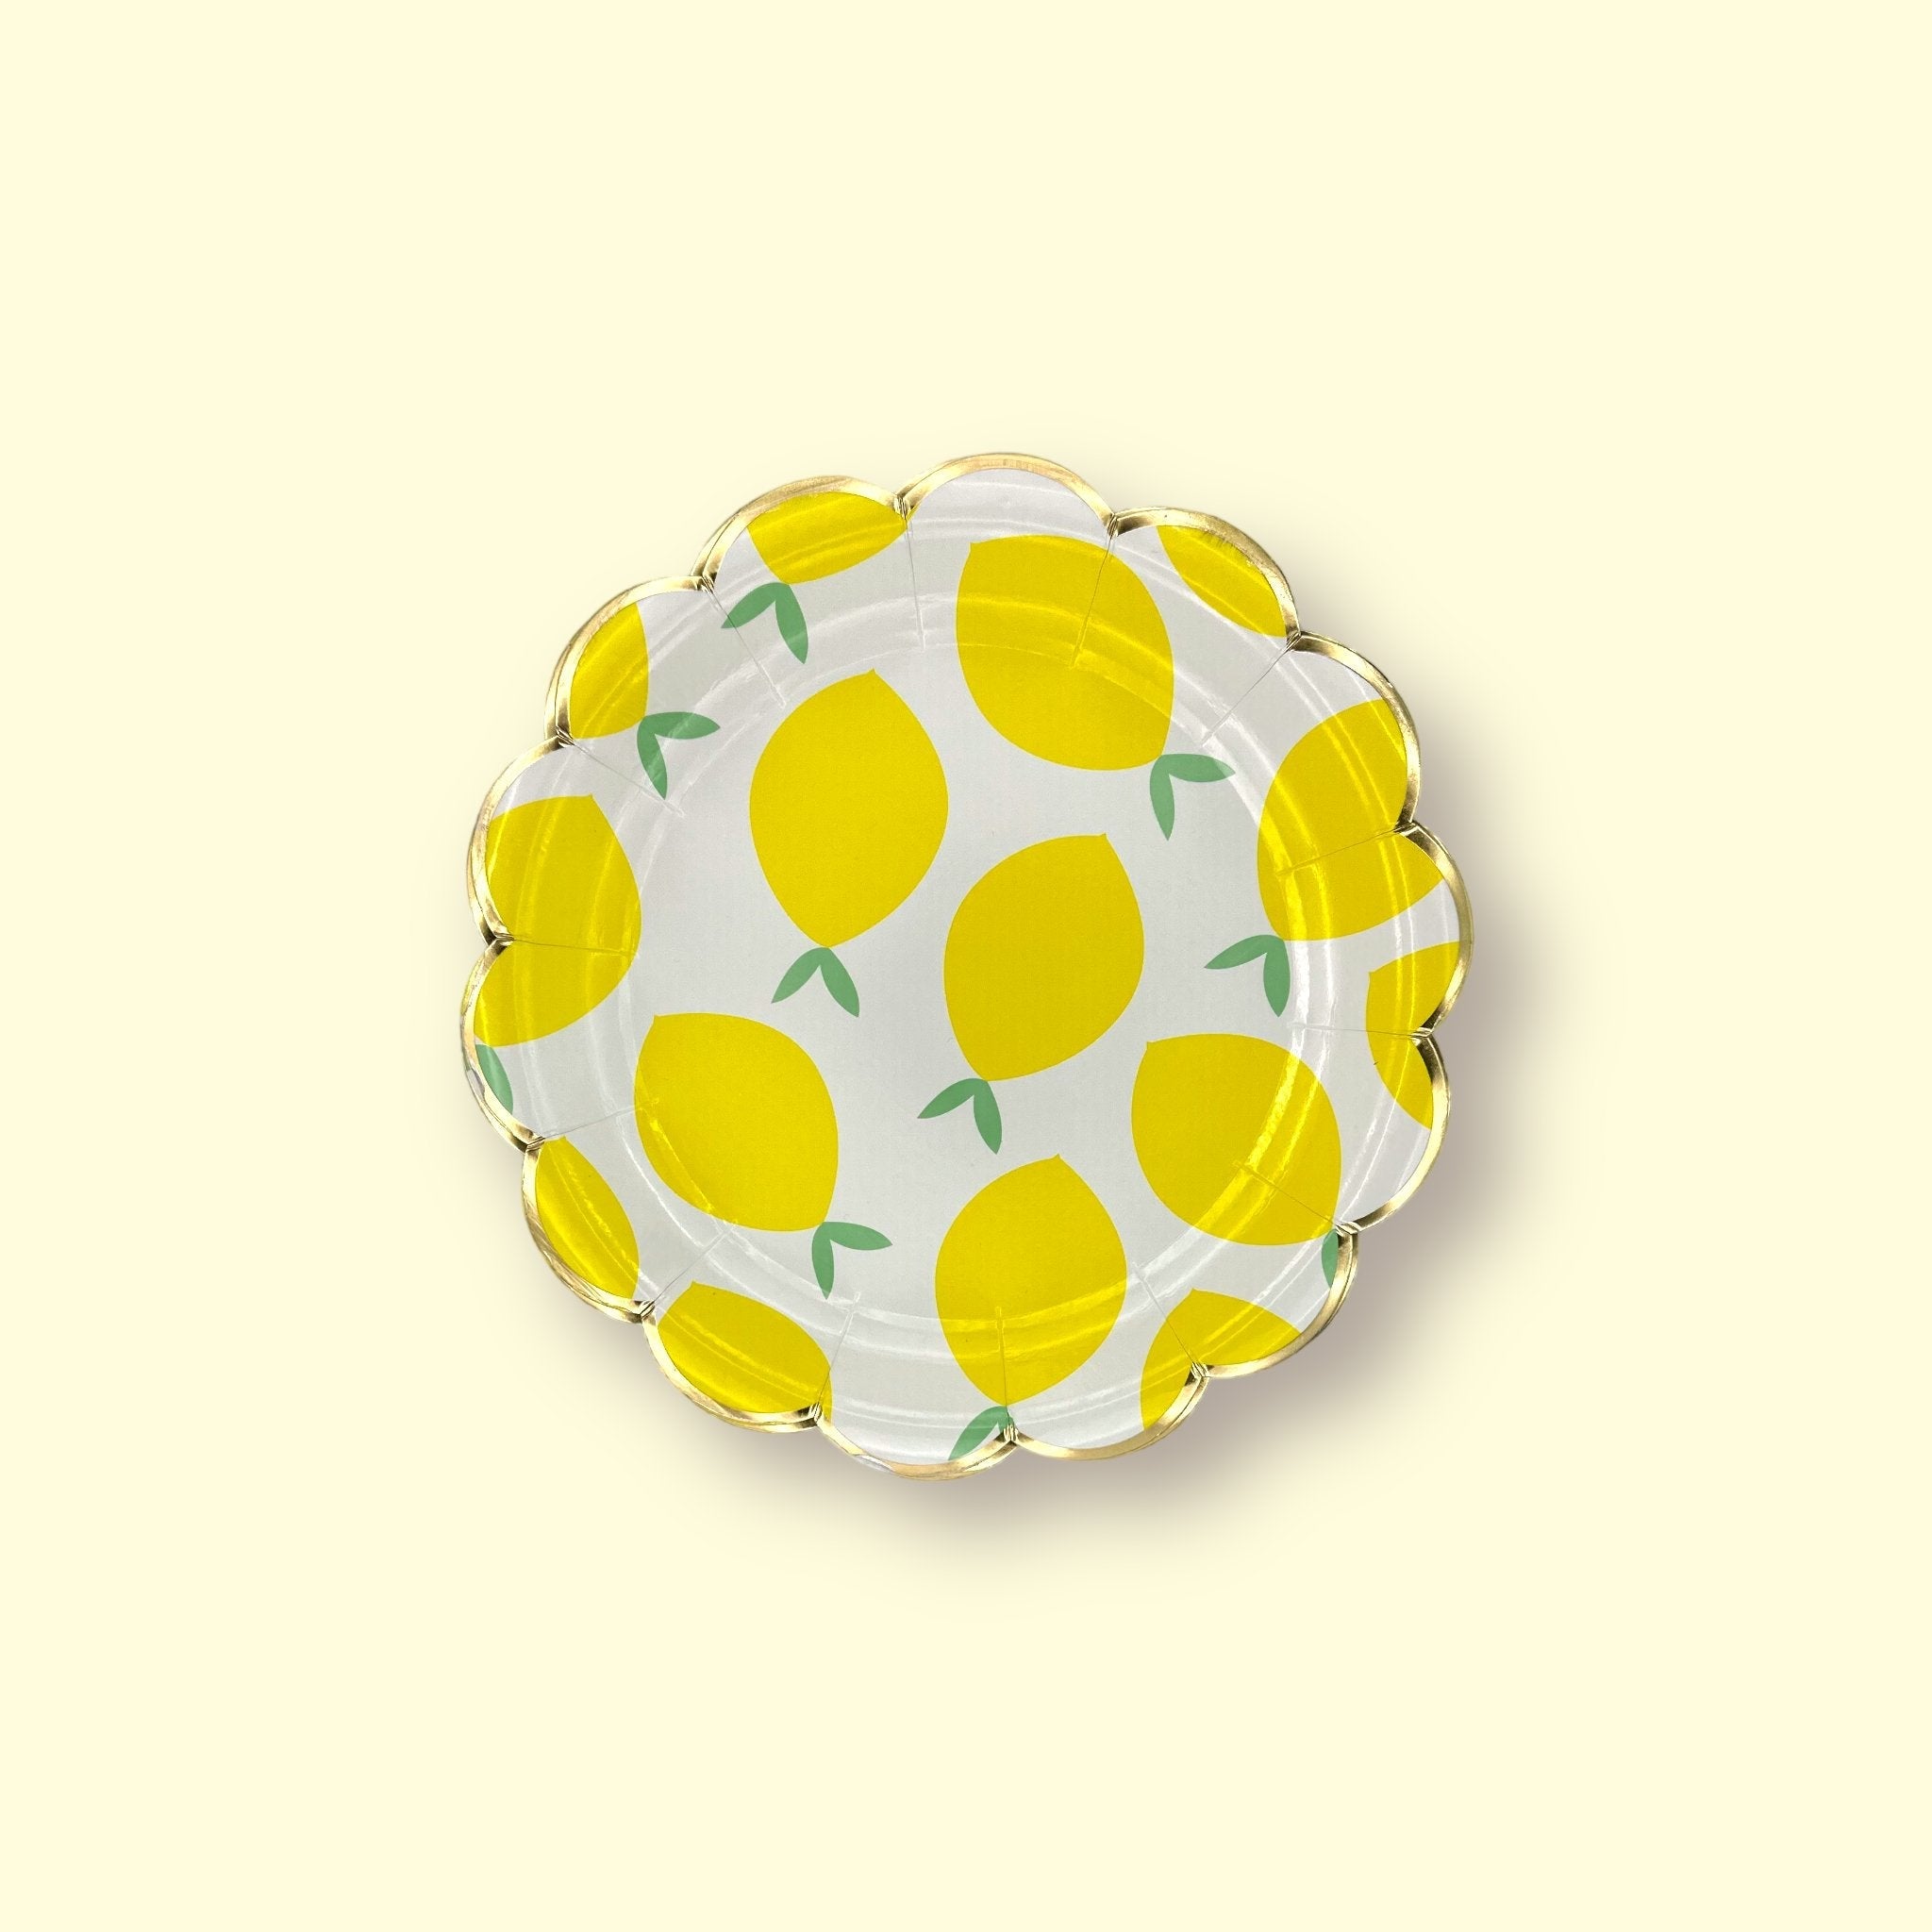 8 Positano Lemon Paper Party Cake Plates (7 inch) - Cook and Party